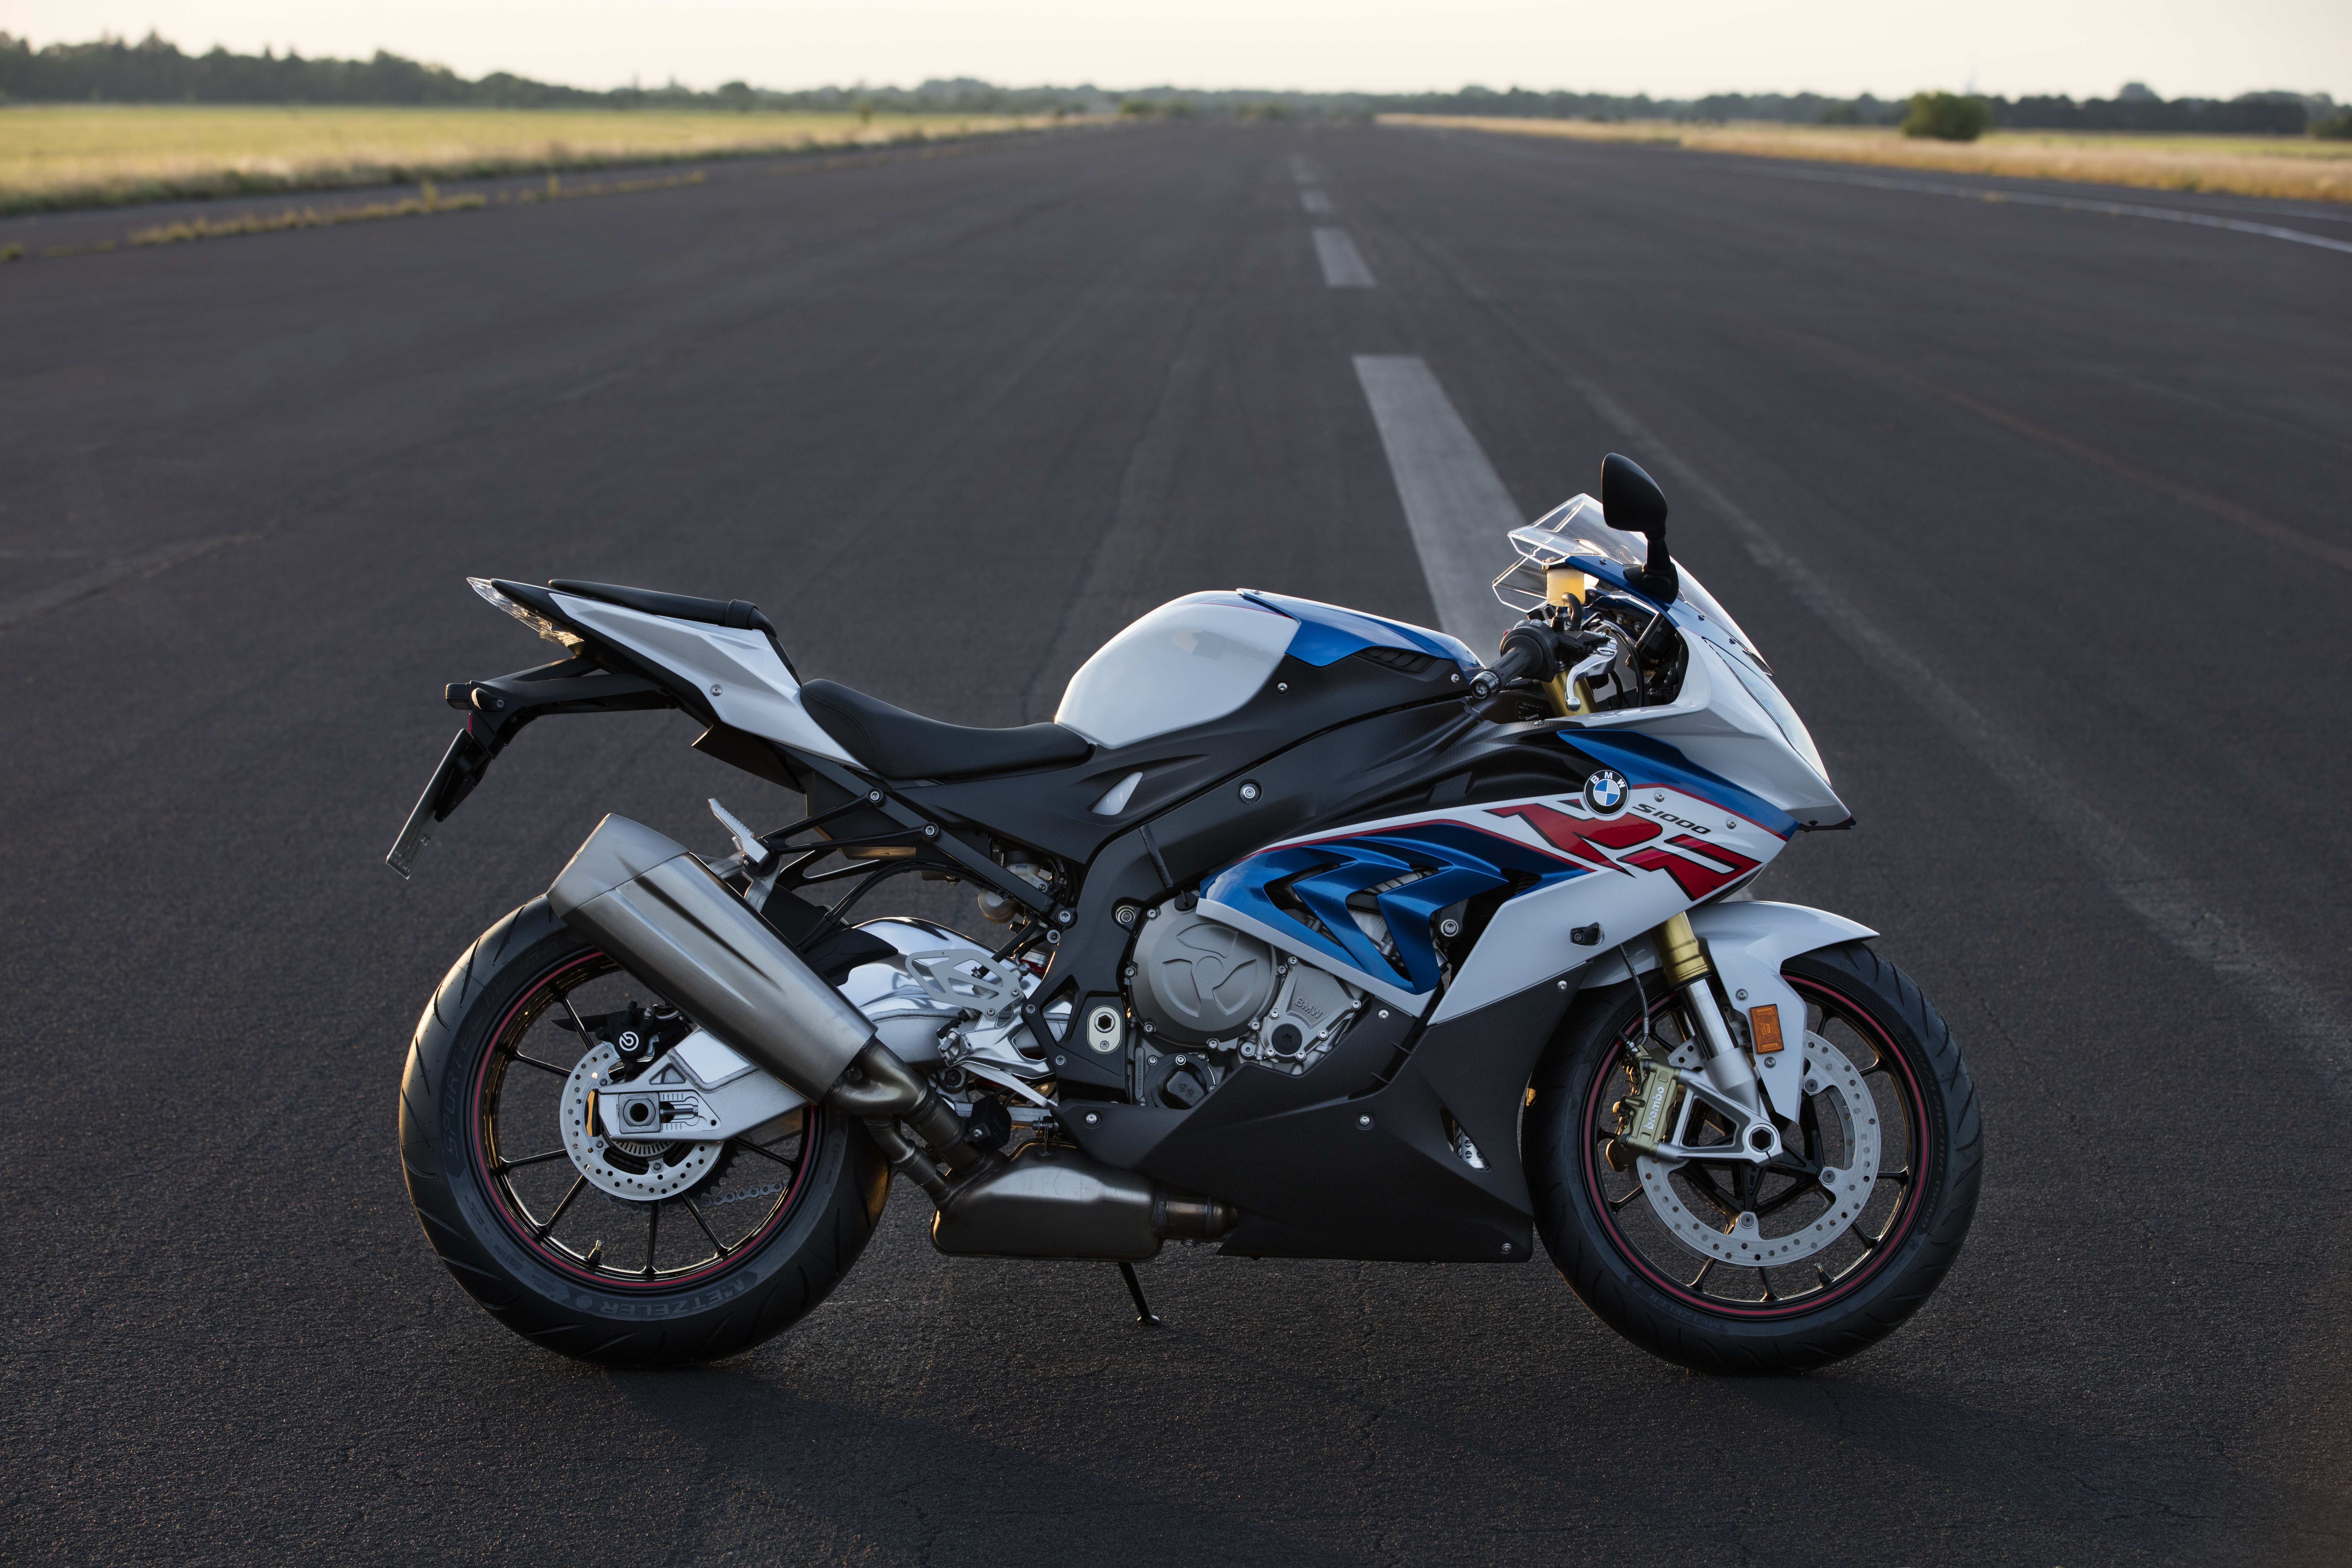 bmw s1000, bmw s1000rr, motorcycles, vehicles, motorcycle